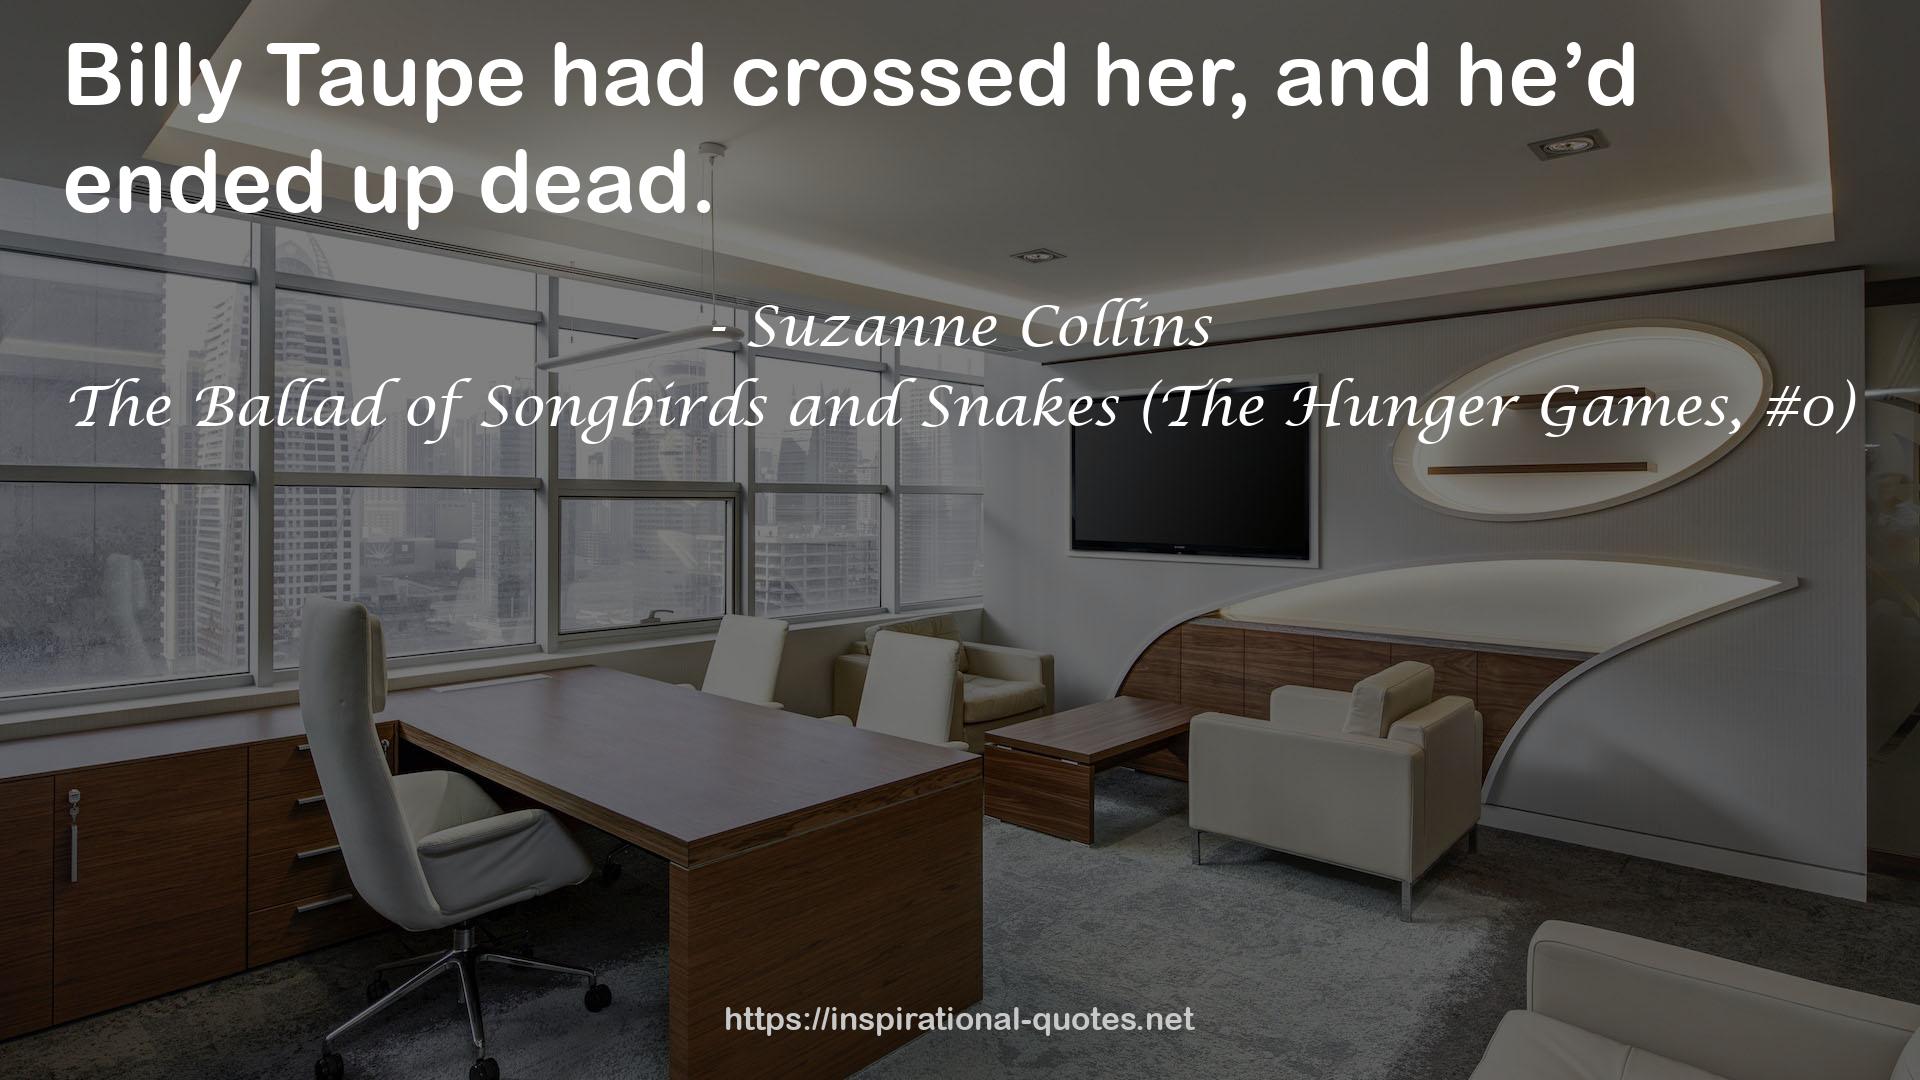 The Ballad of Songbirds and Snakes (The Hunger Games, #0) QUOTES